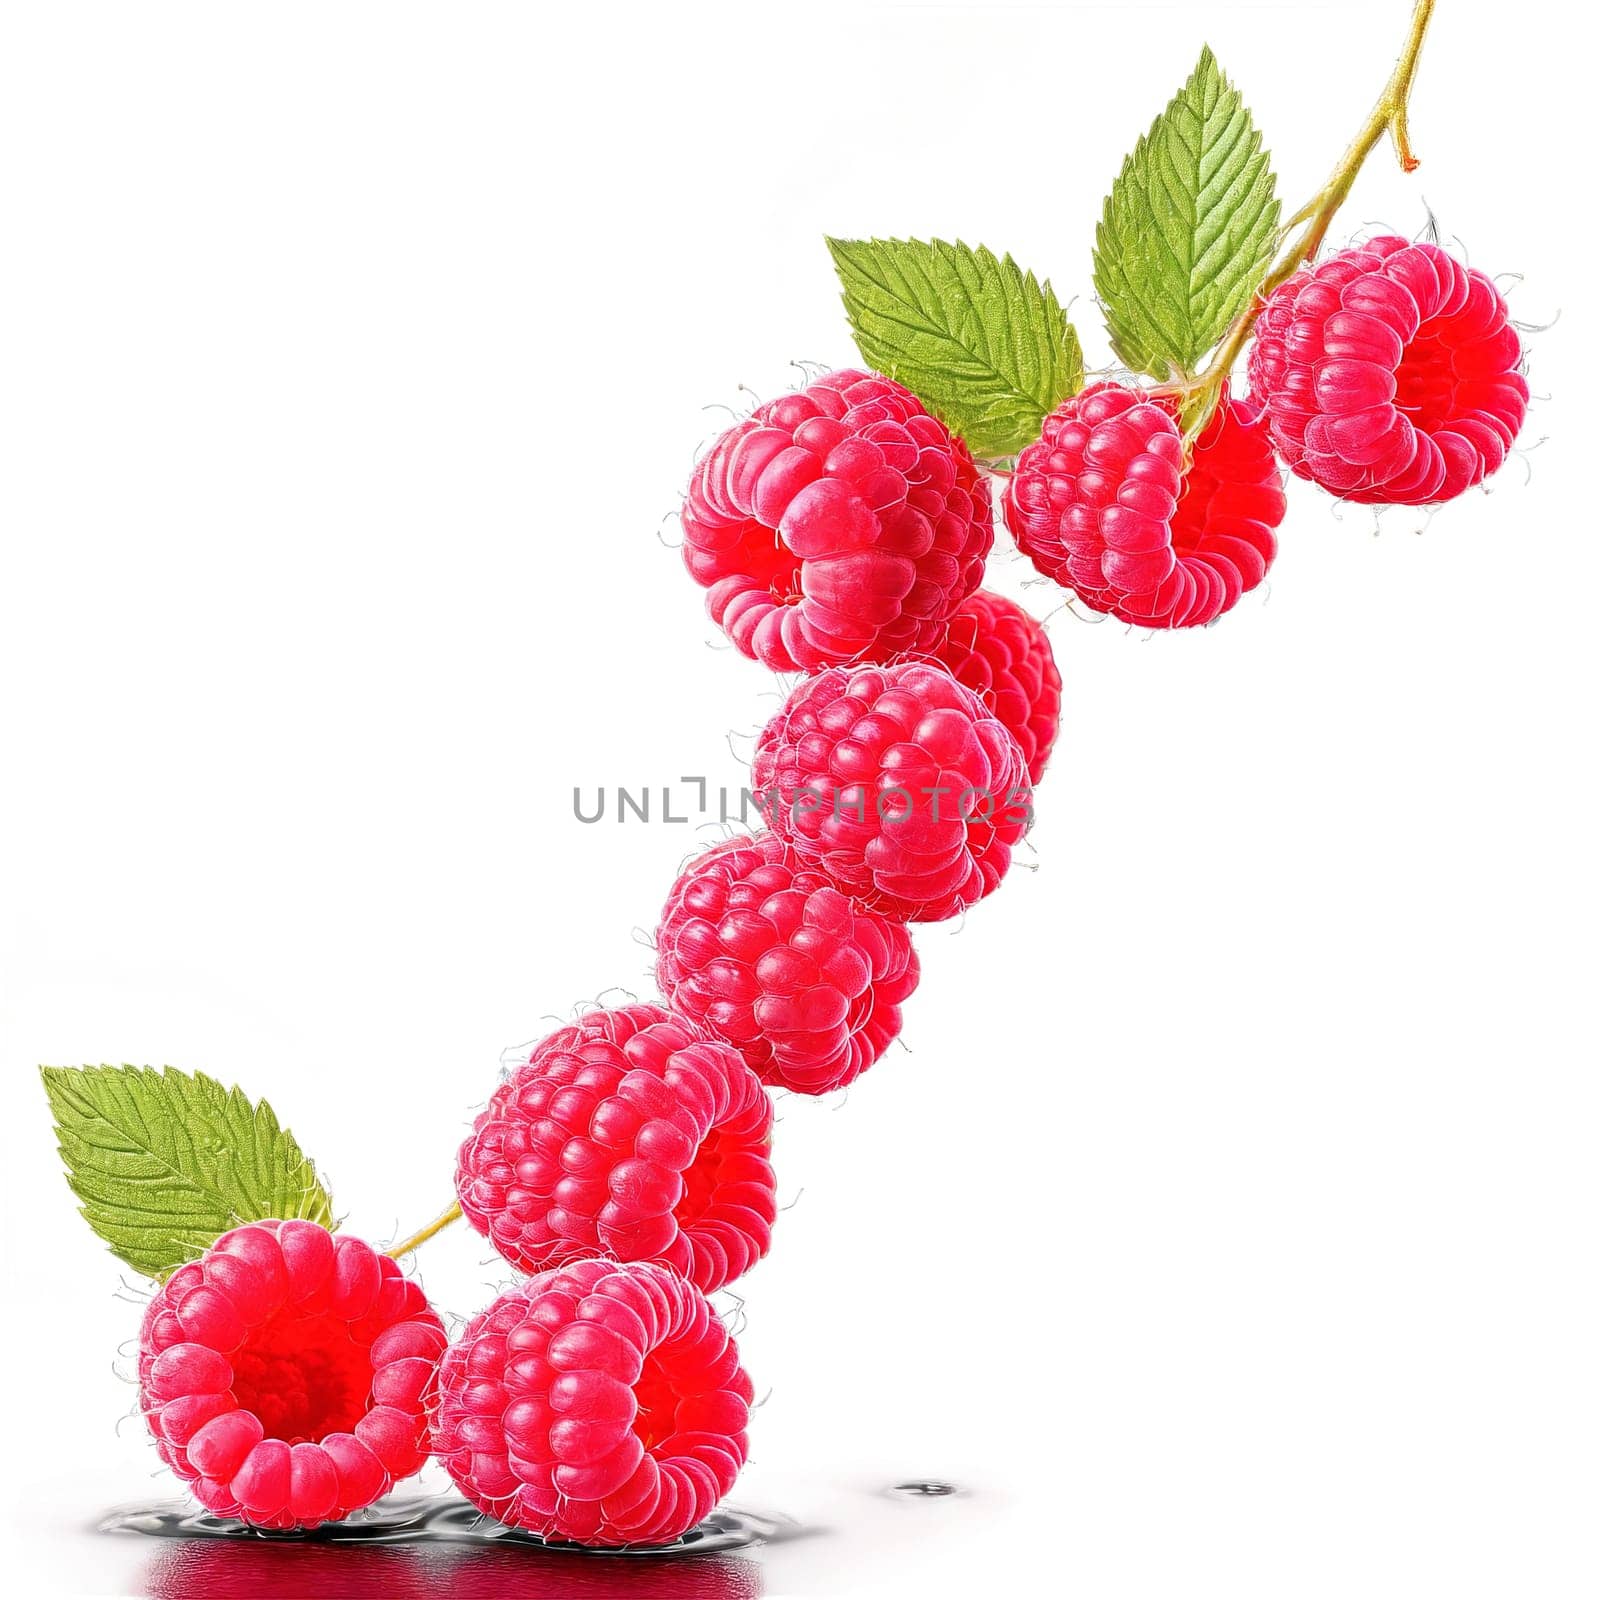 Raspberries plump raspberries forming a wave shape by panophotograph